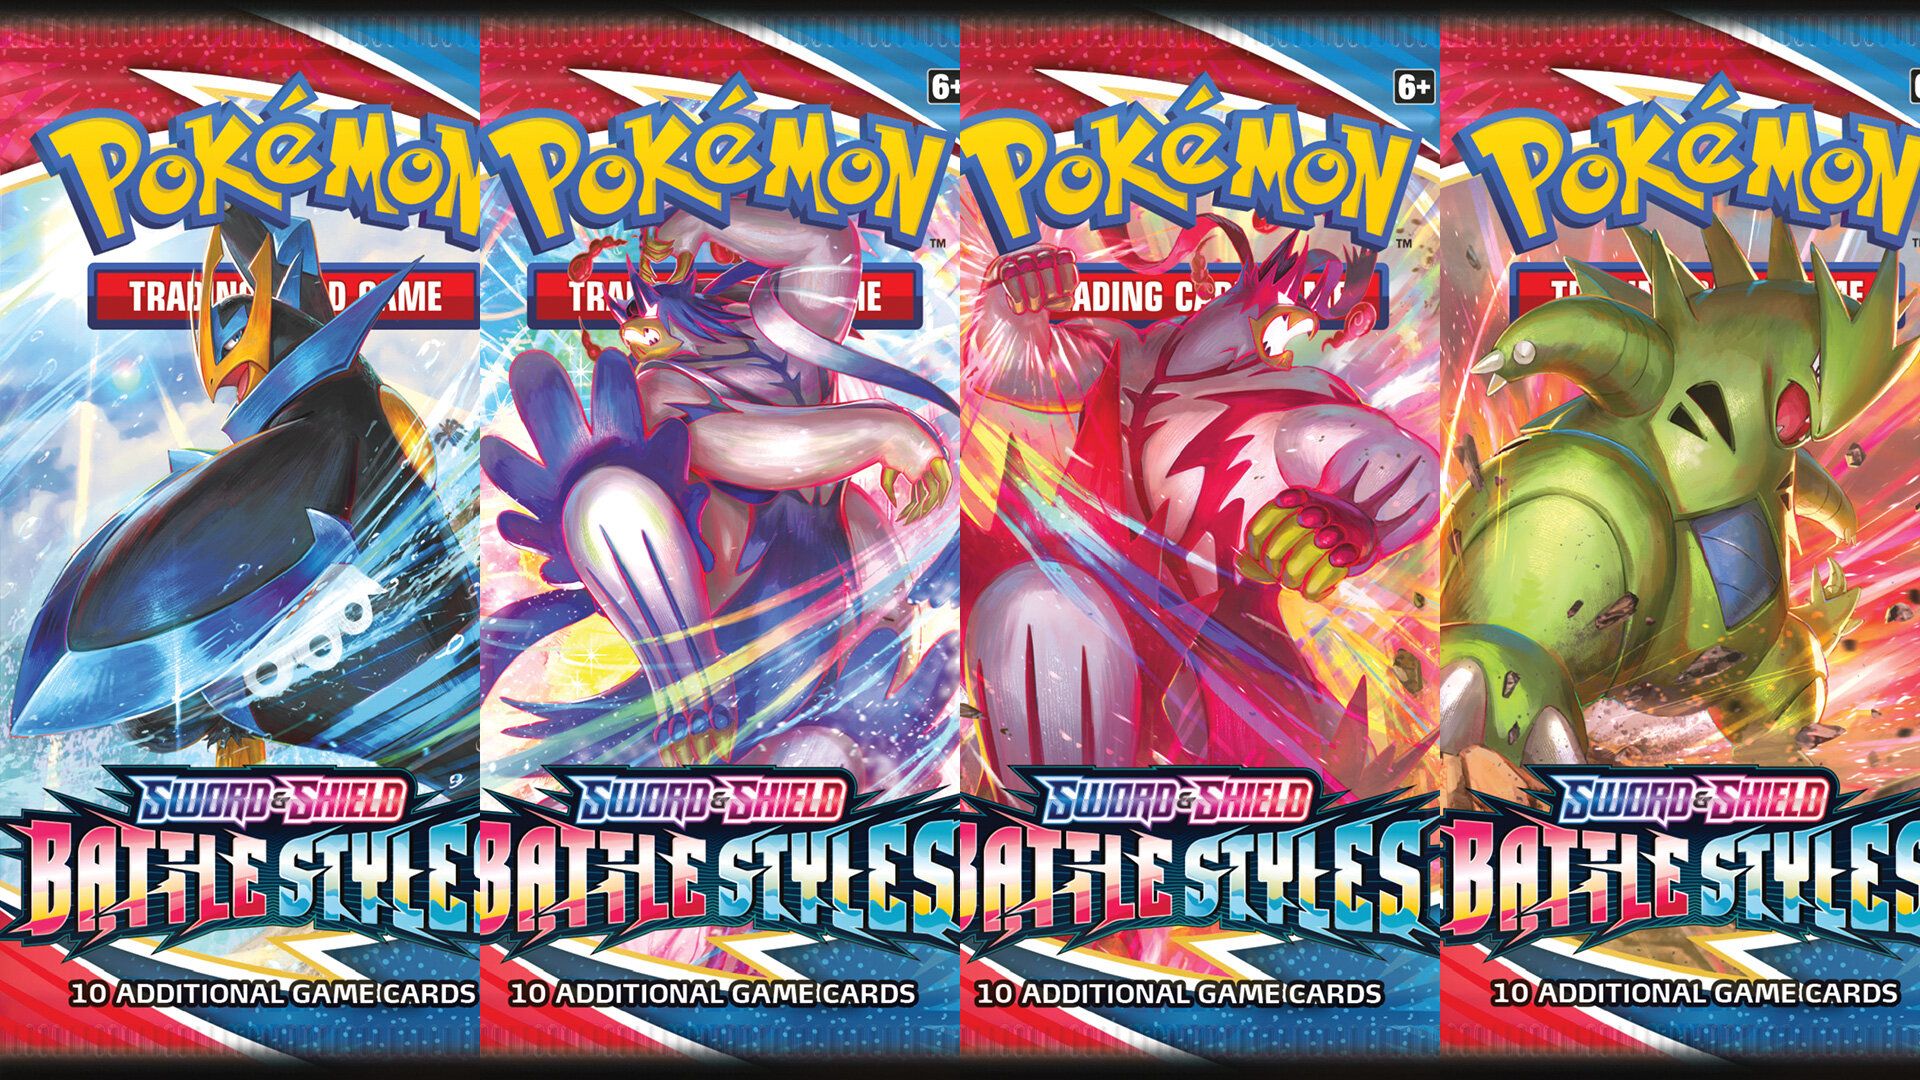 POKEMON TCG is Introducing a New Mechanic in SWORD & SHIELD STYLES Expansion